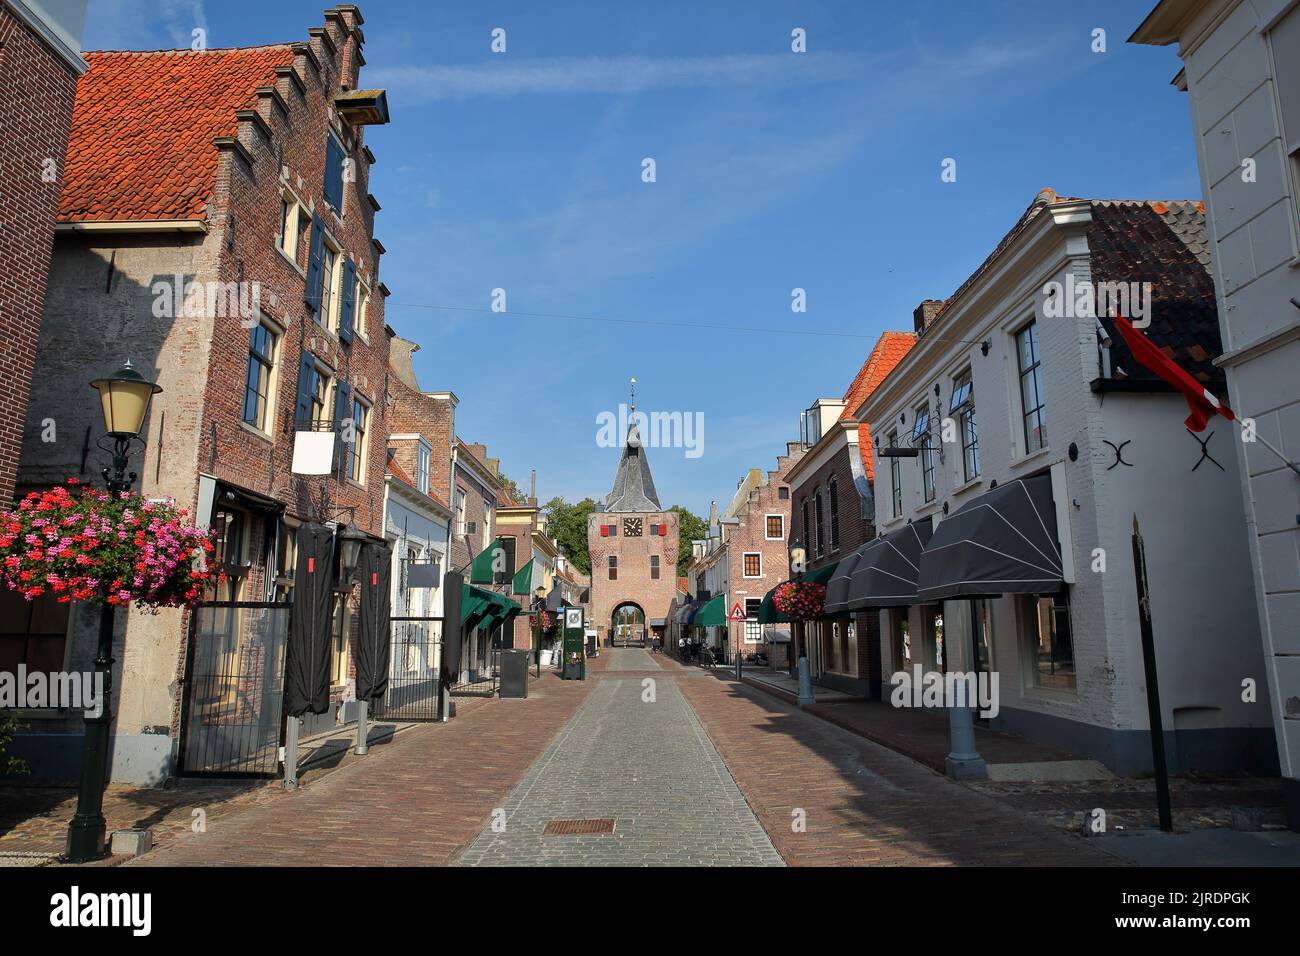 Traditional historic medieval houses along the main street (Vischpoortstraat) in the old picturesque fortified town of Elburg, Gelderland, Netherlands Stock Photo